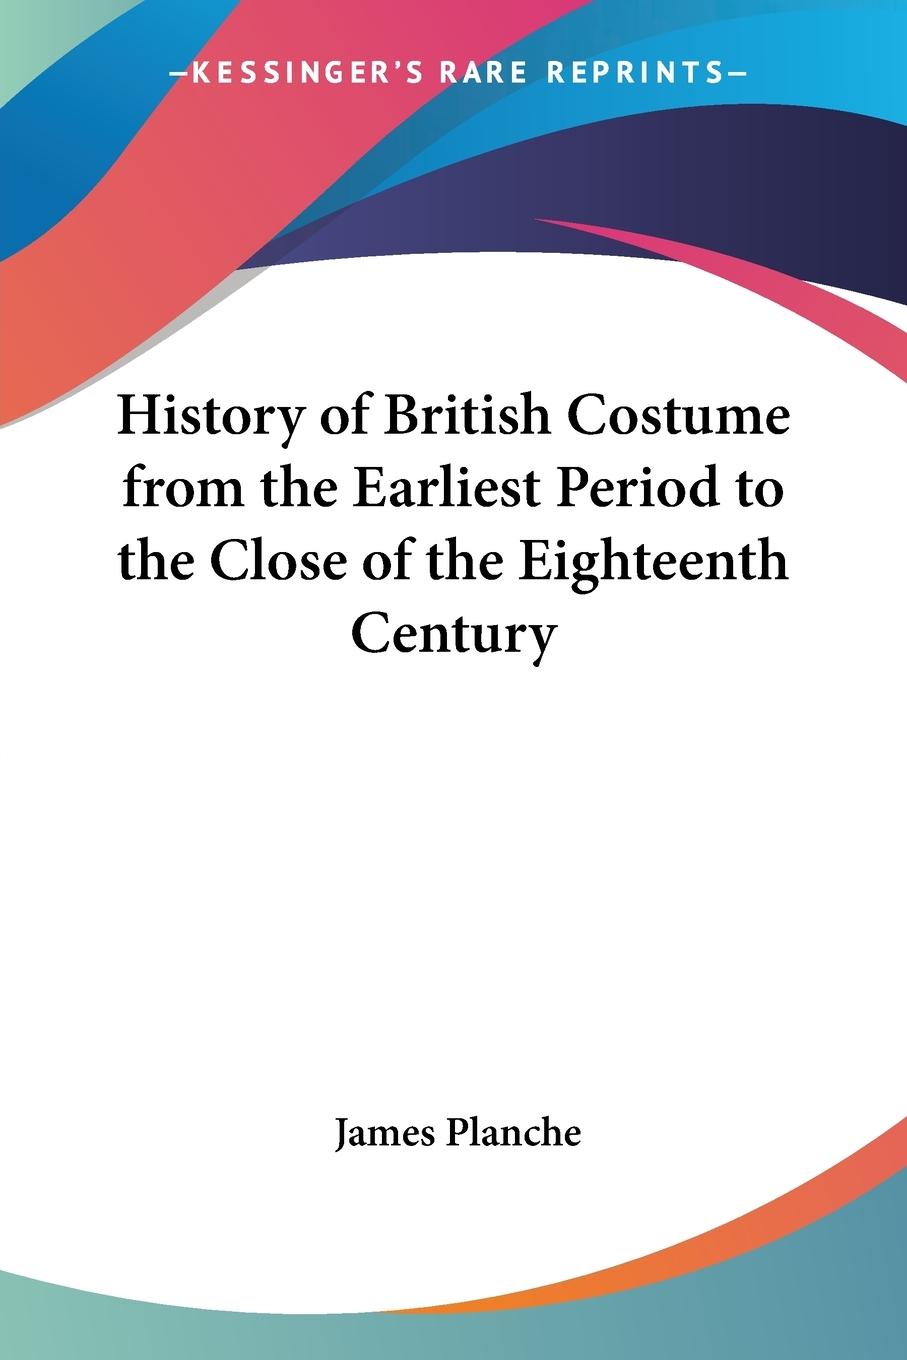 History of British Costume from the Earliest Period to the Close of the Eighteenth Century - Planche, James